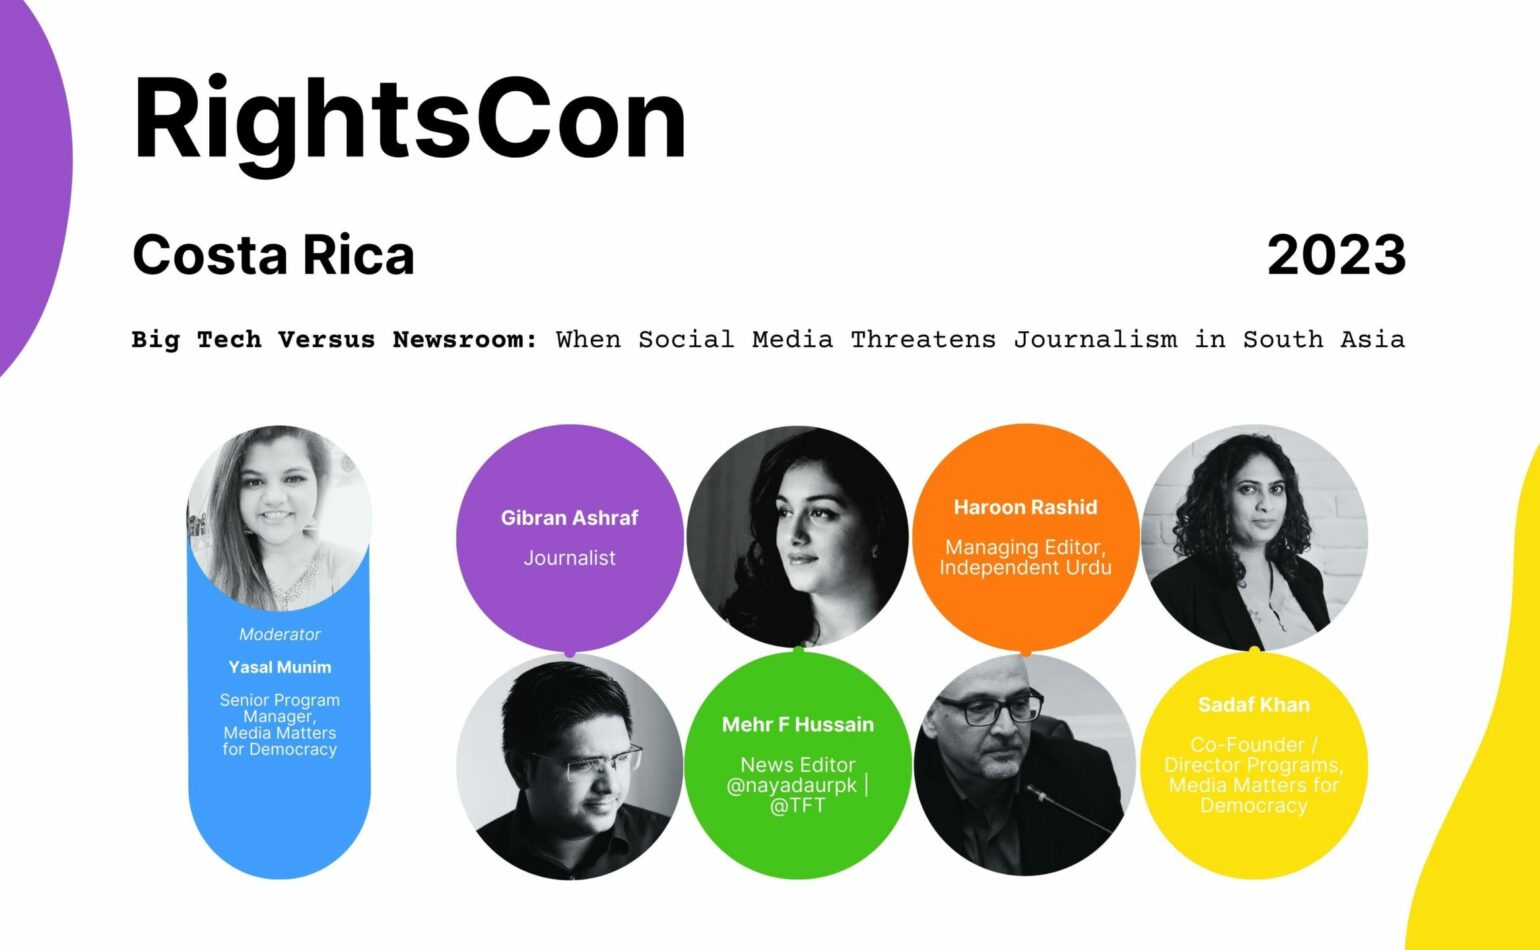 MMfD deconstructs Big Tech’s role in hindering progress of digital newsrooms at RightsCon 2023